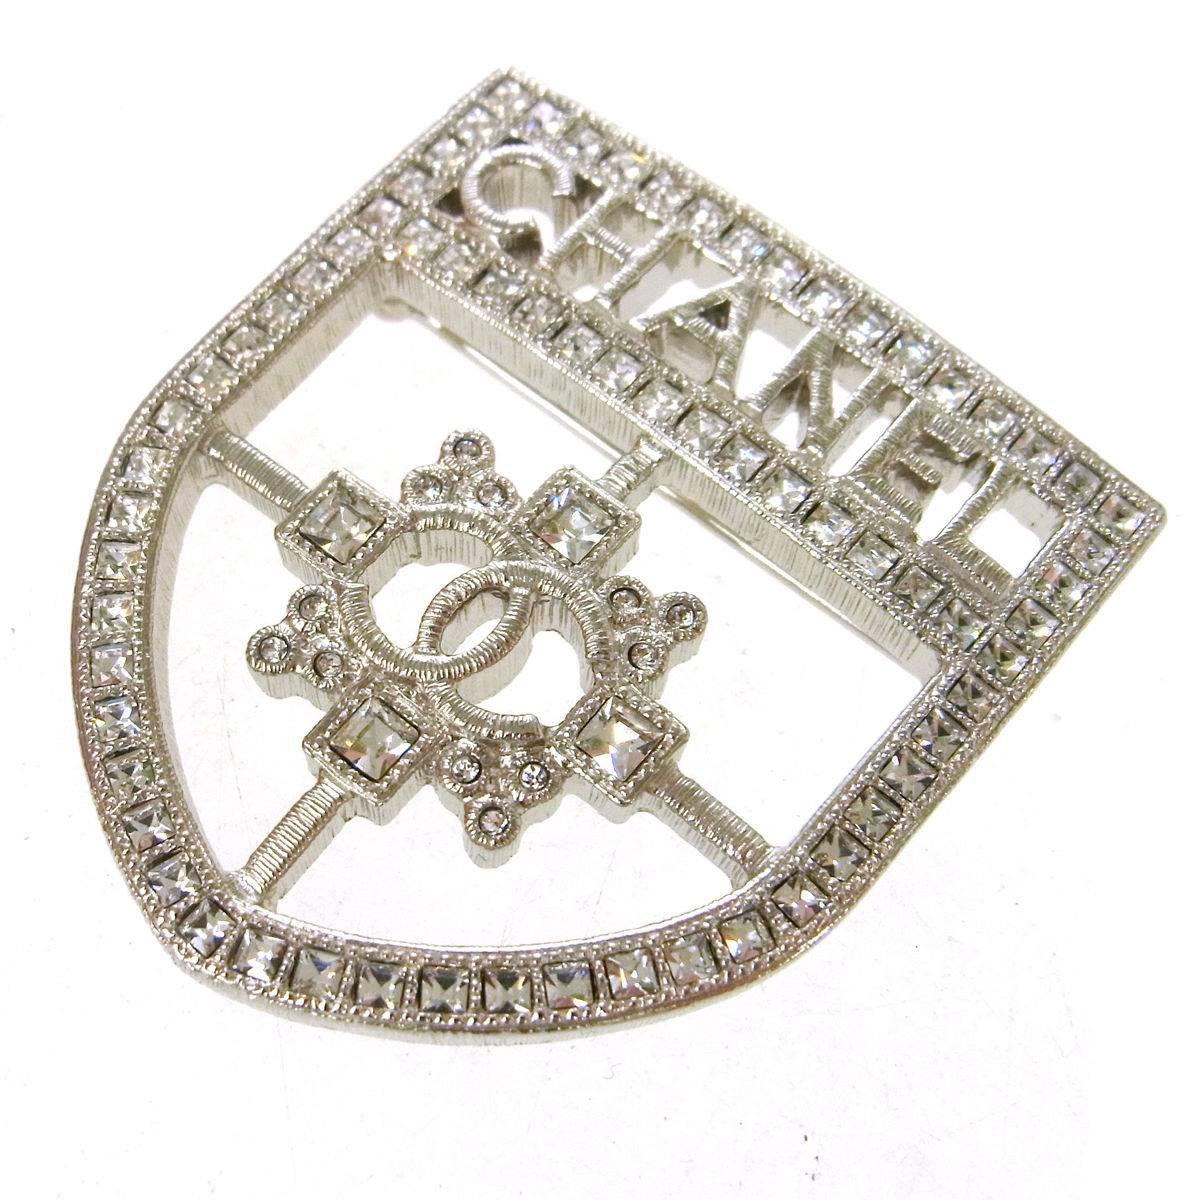 CURATOR'S NOTES 

Chanel Rare CURRENT Silver Crystal Crest Shield Brooch in Box 

Metal
Silver tone
Crystal
Pin closure
Made in Italy
Measures 1.75" W x 2" H 
Includes original Chanel box

Shop Newfound Luxury for authentic pre-owned